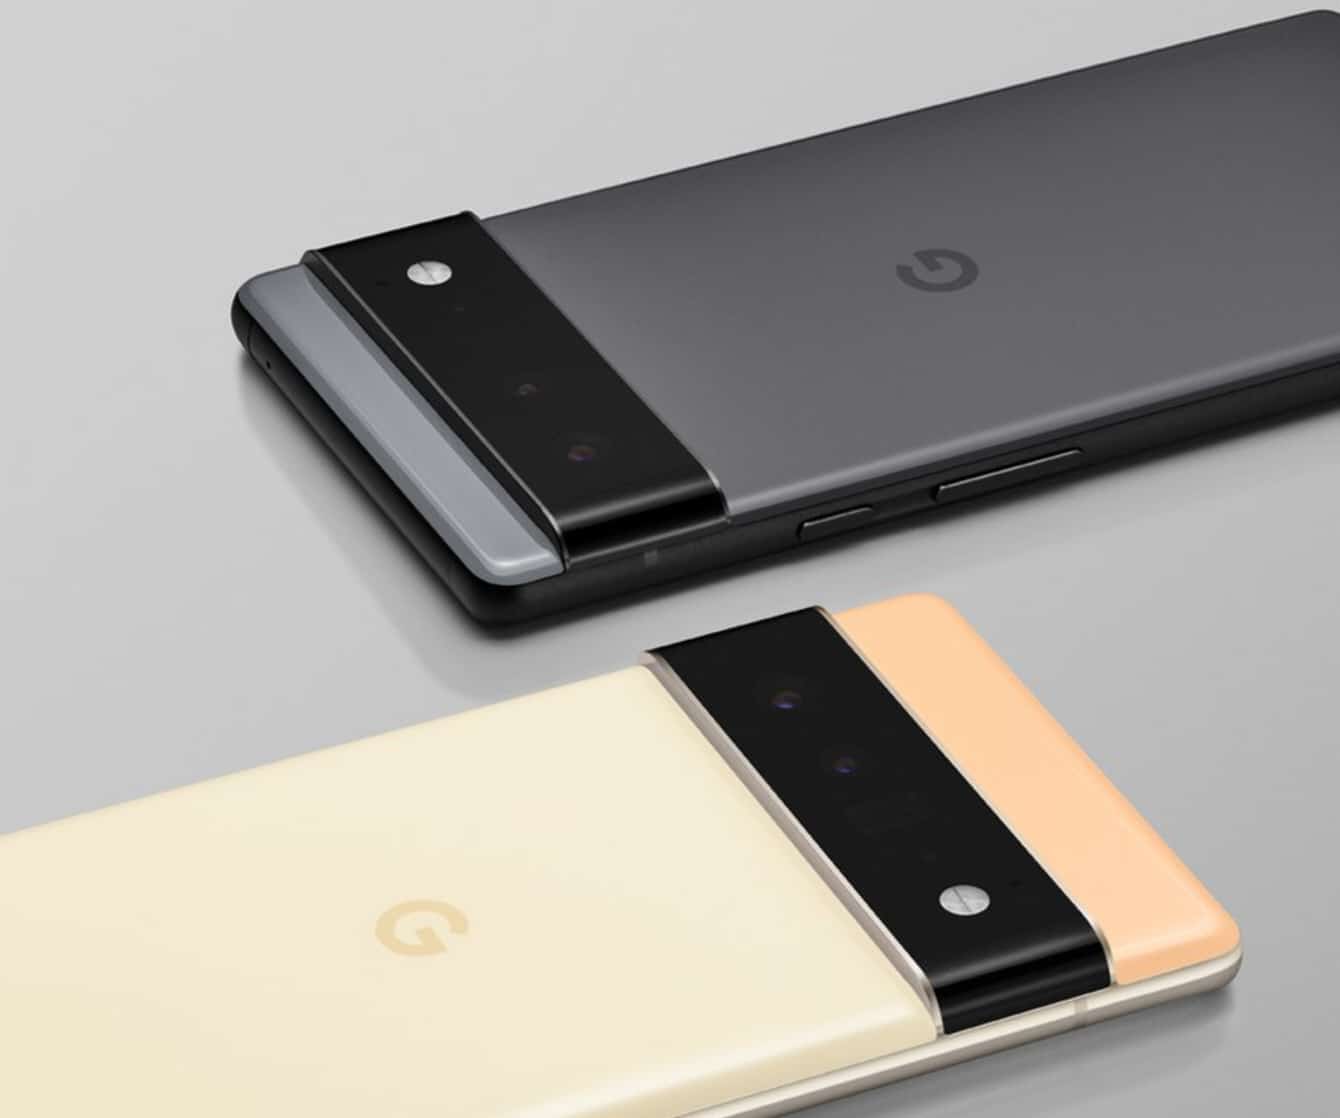 photo of Google's Pixel6 and Pixel6 Pro smartphones will be powered by a Google designed chip image